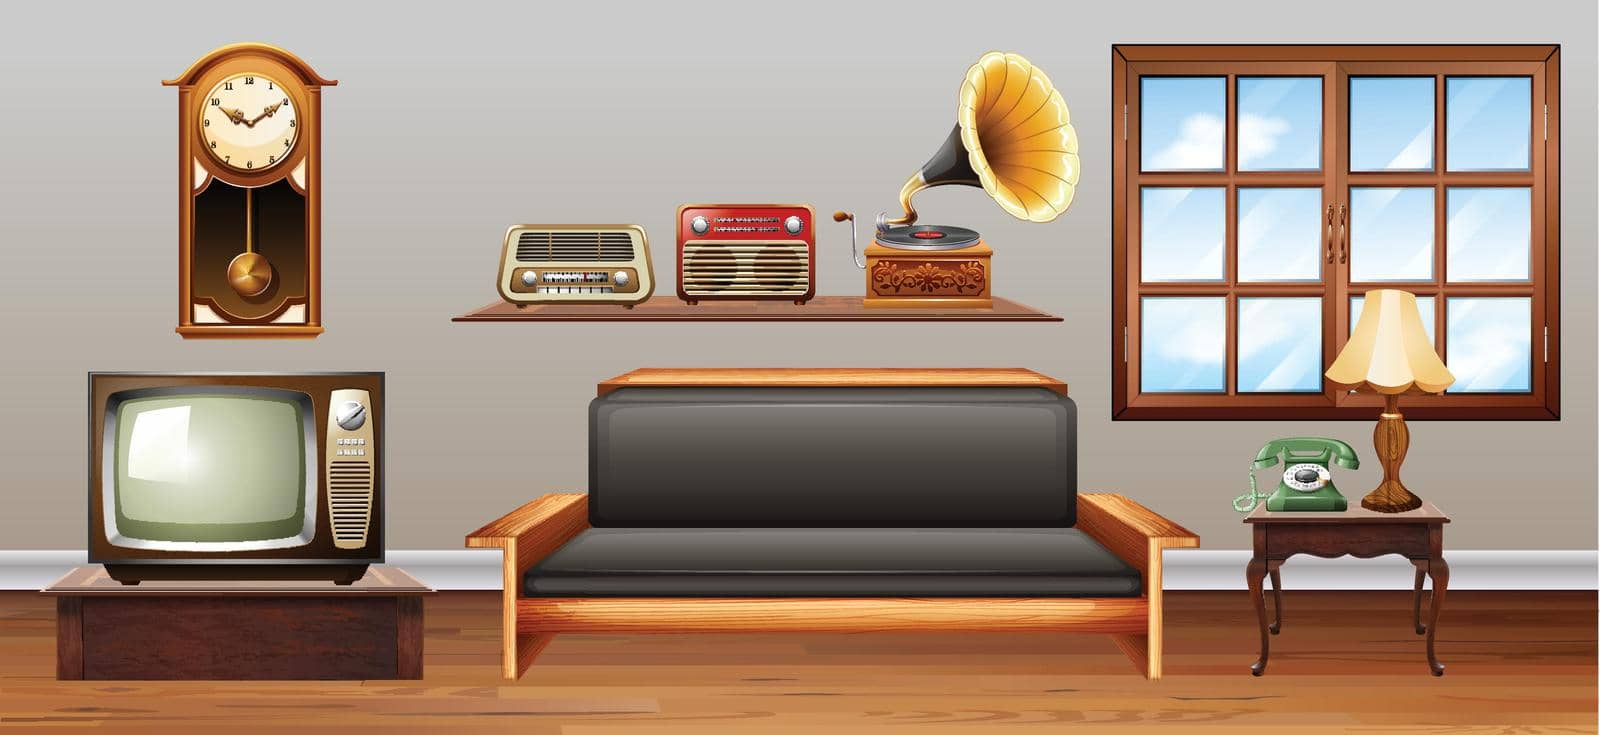 Vintage objects in the living room illustration